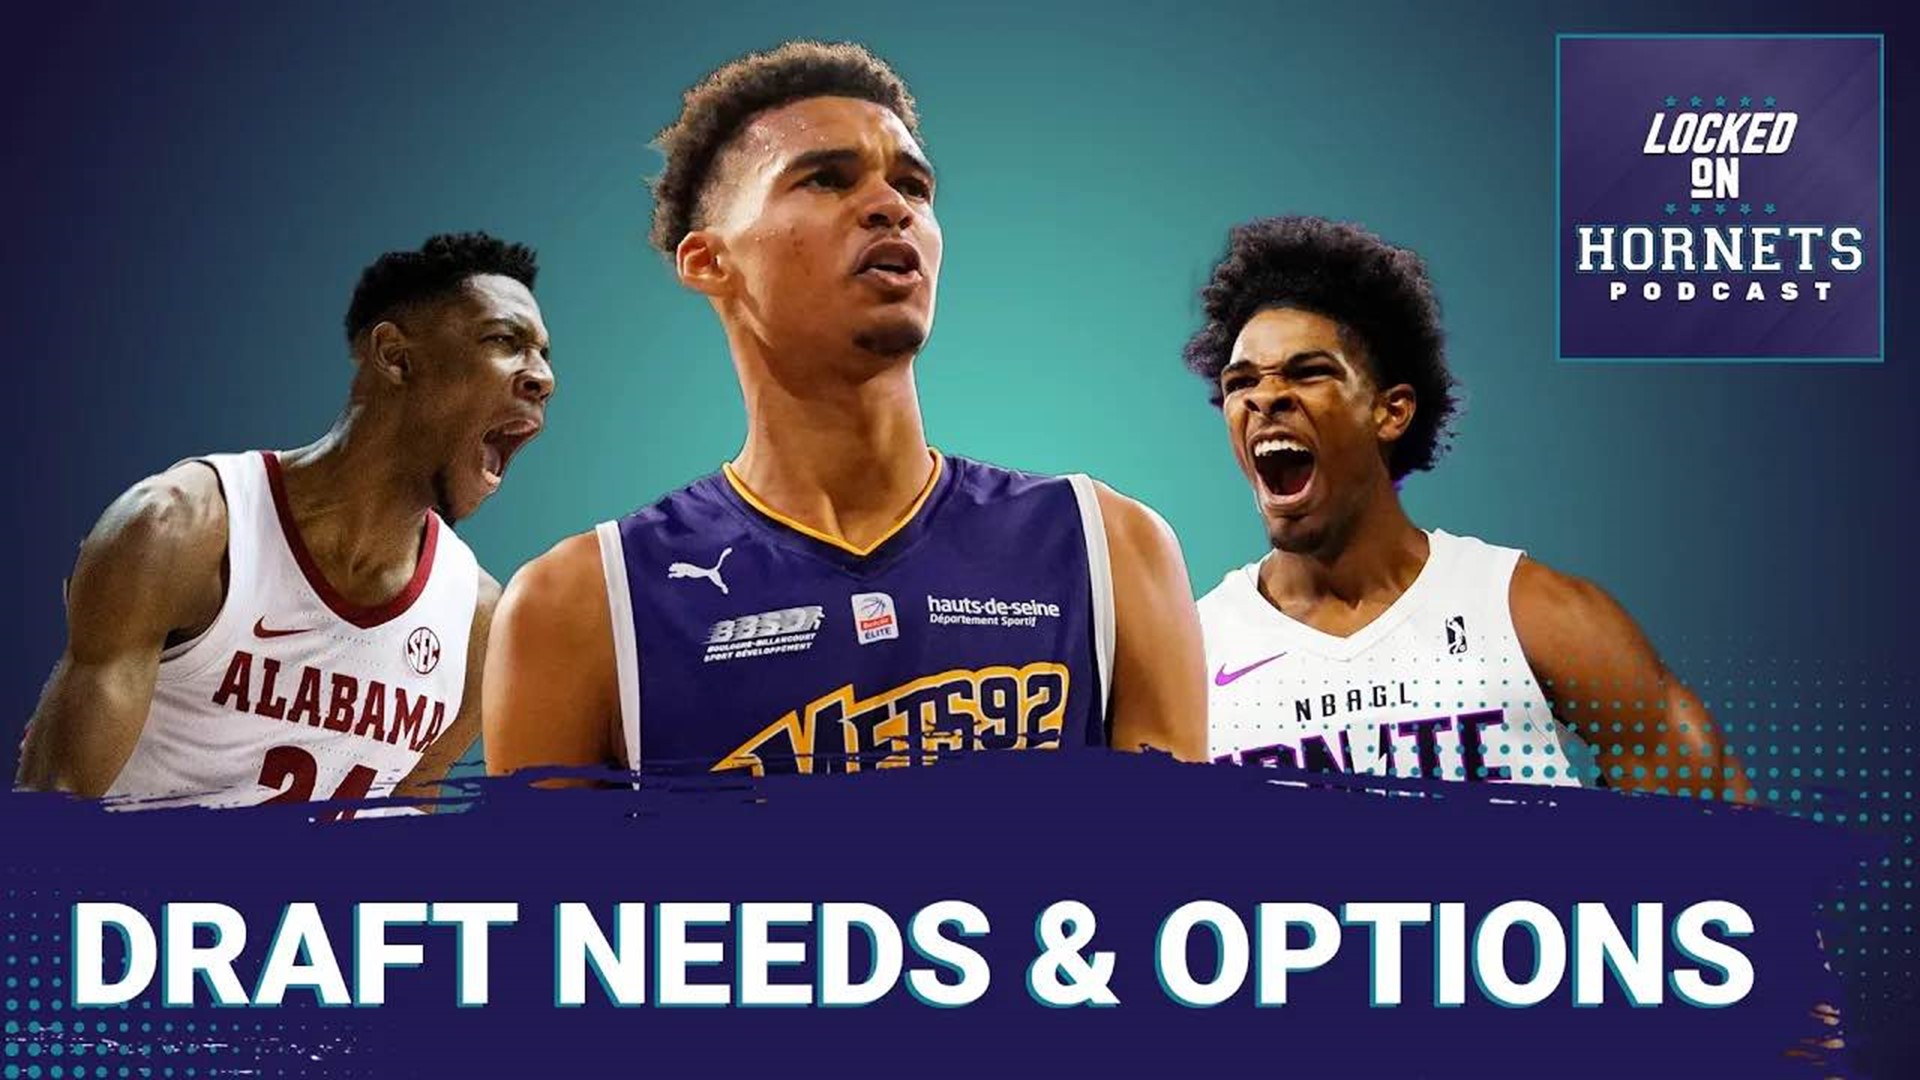 Locked On Hornets opens up the draft discussion as they take a look at Charlotte's needs during the selection process.